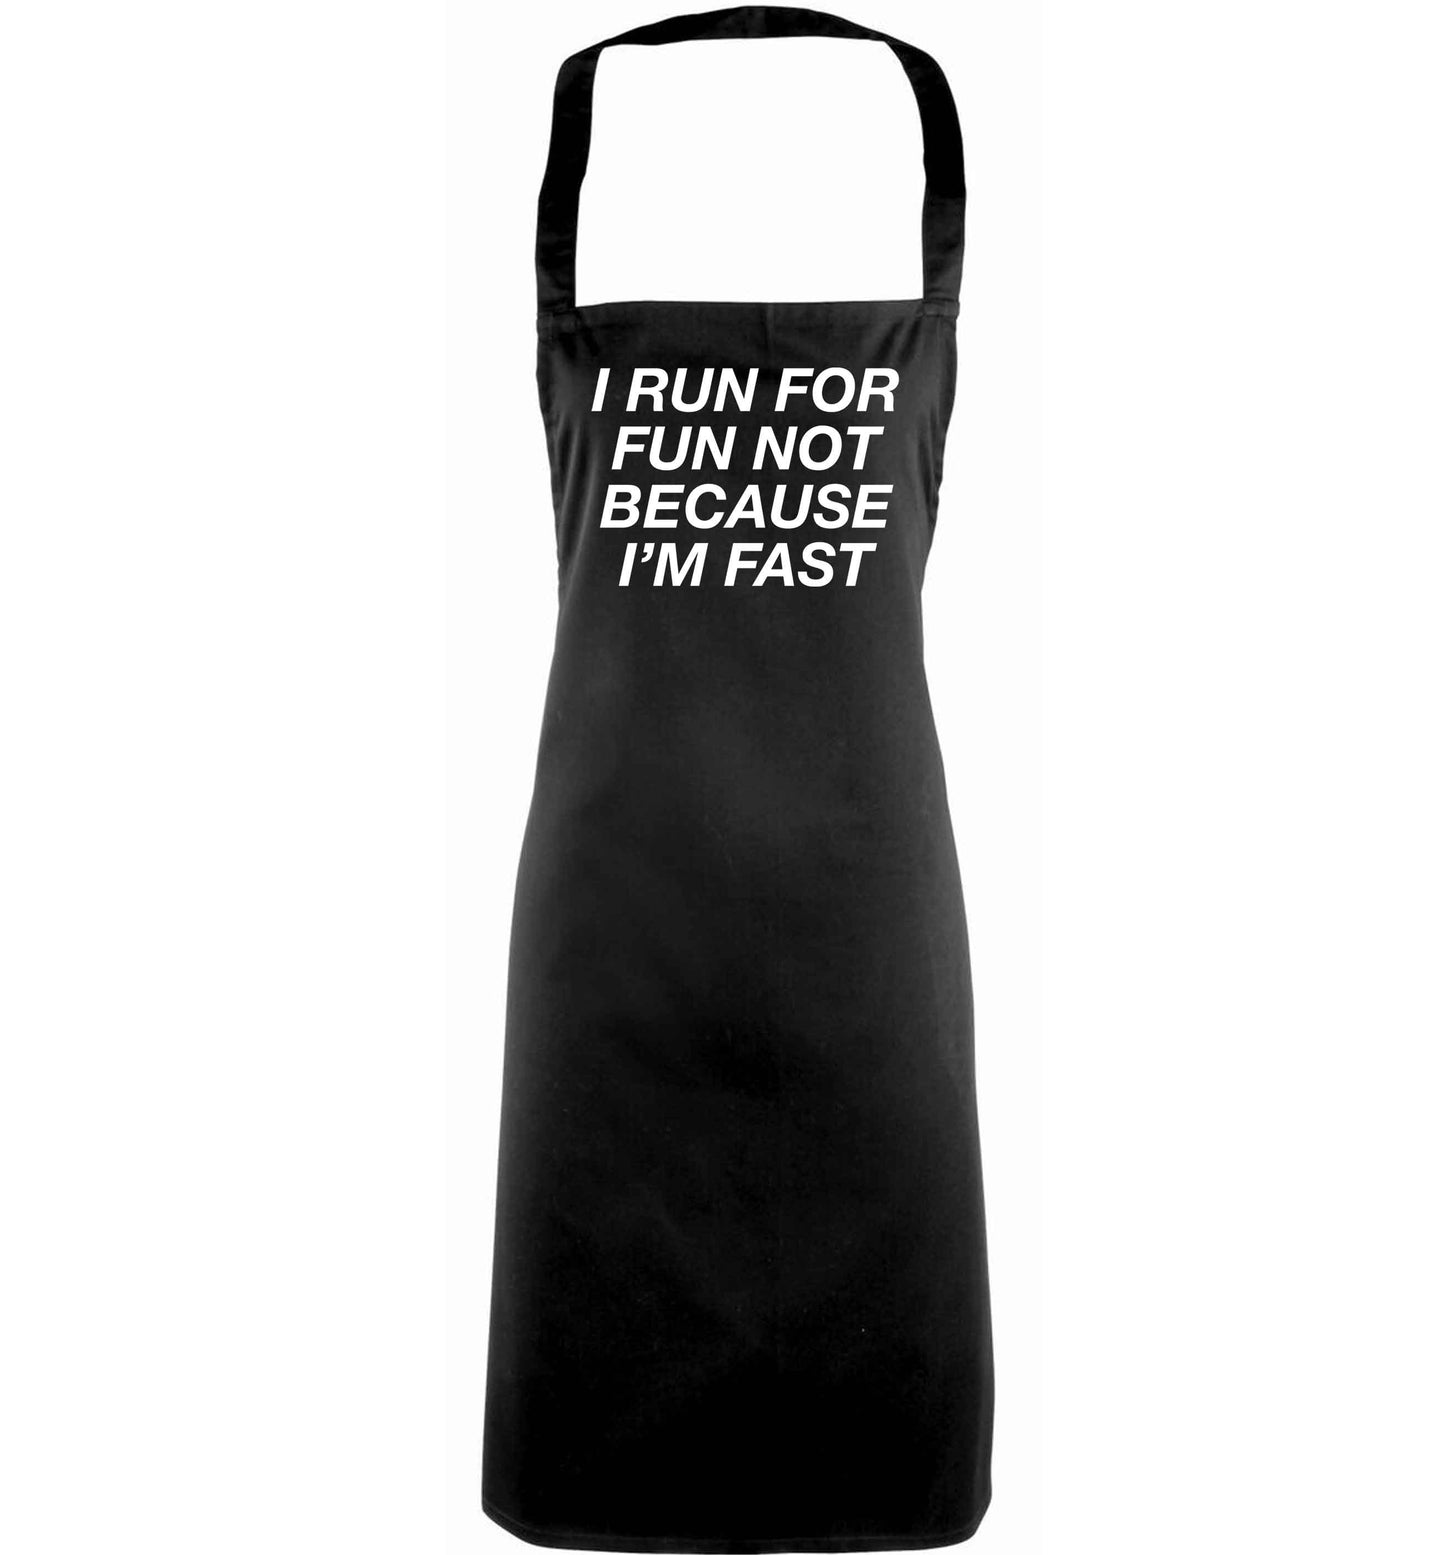 I run for fun not because I'm fast adults black apron